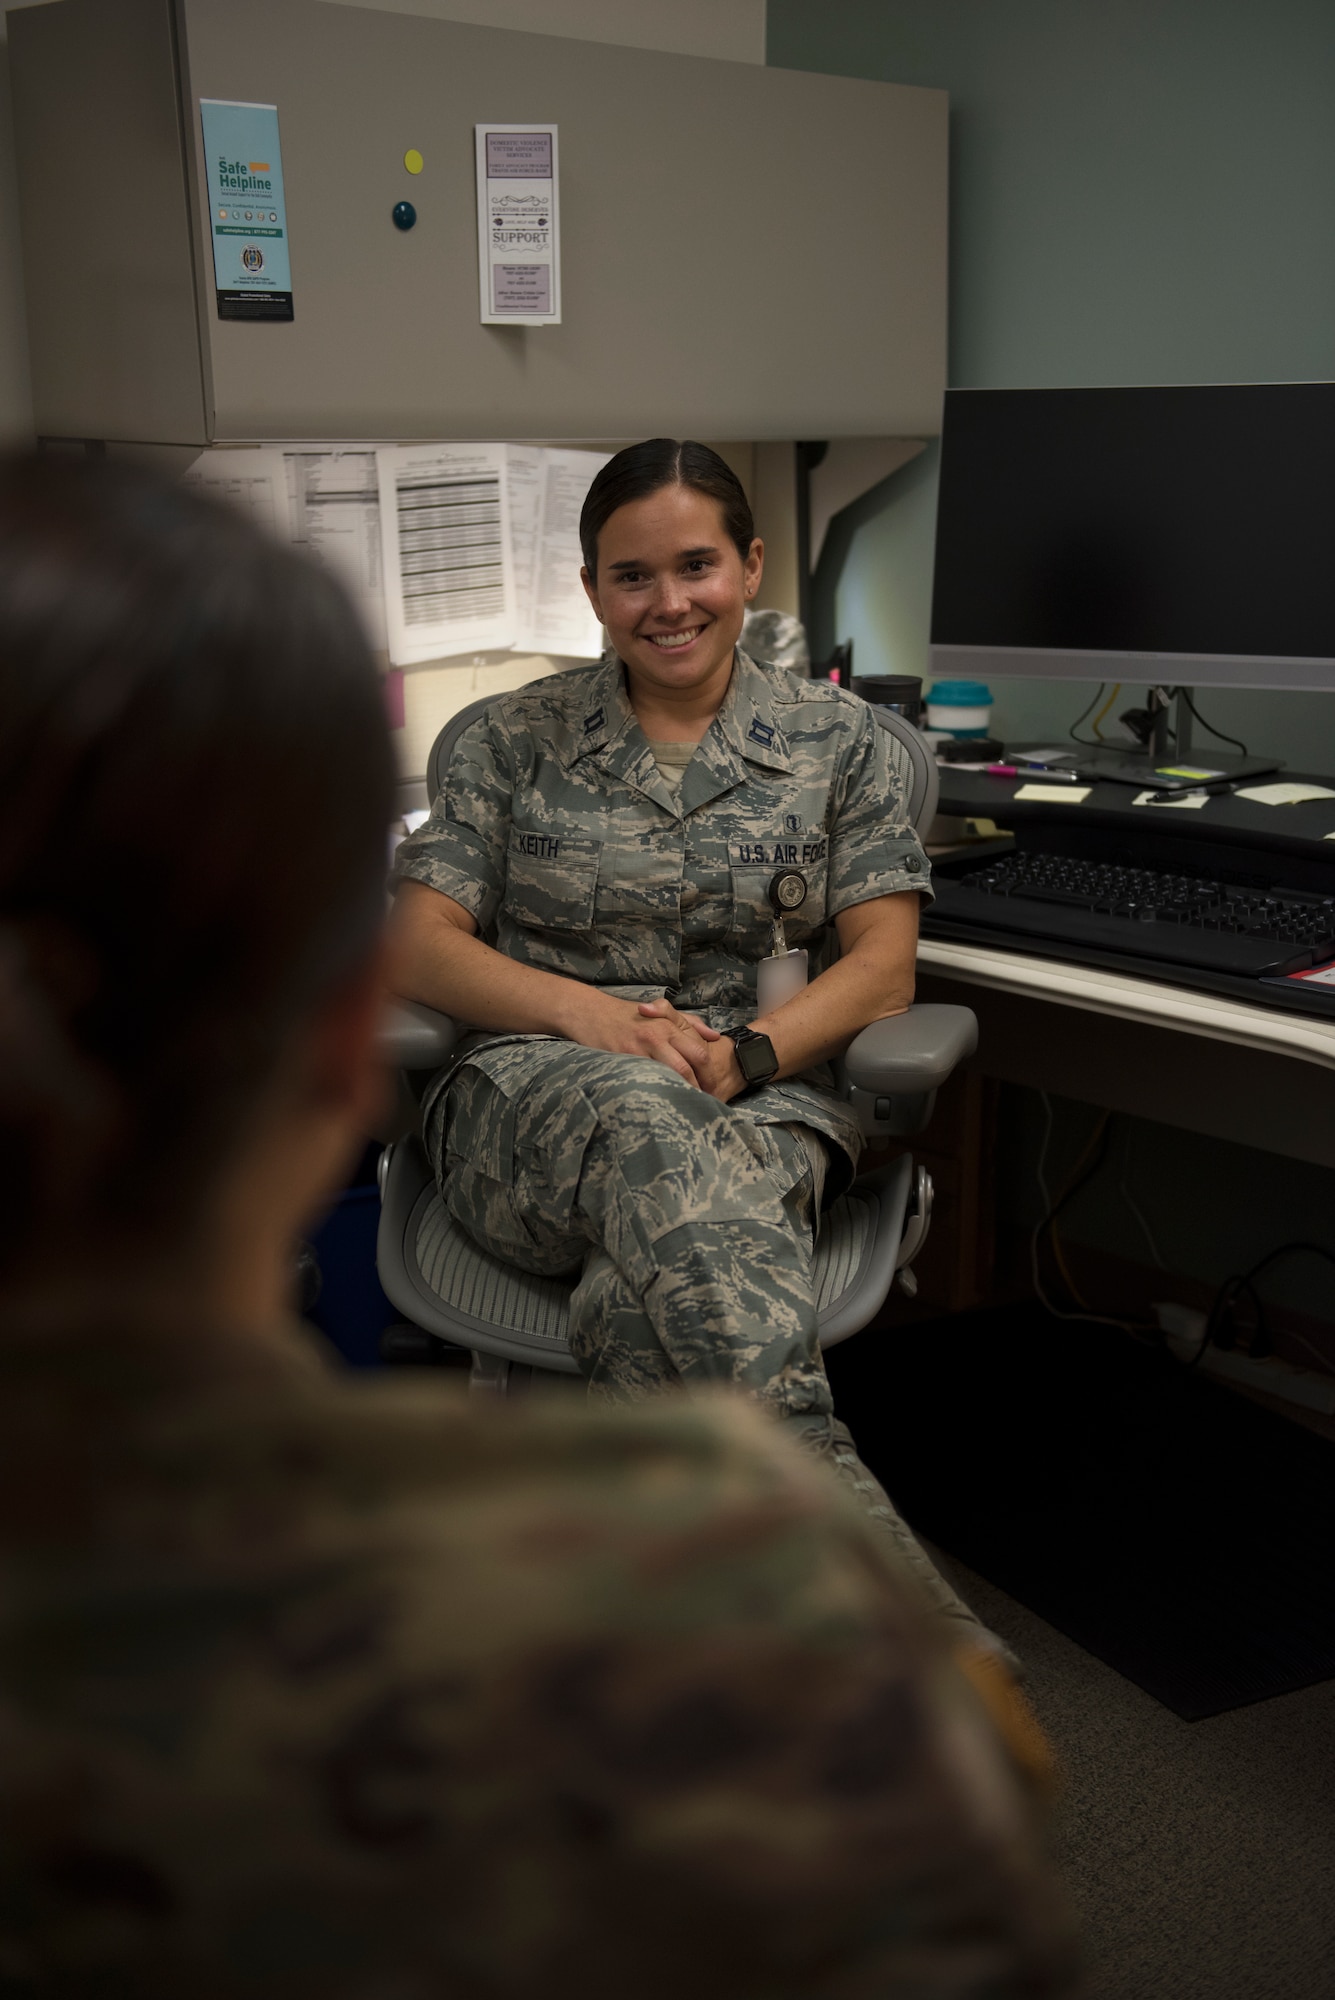 Capt. Felicia Keith, 60th Medical Operations Squadron director of psychological health, listens to one of her patients during a treatment session at David Grant USAF Medical Center at Travis Air Force Base, Calif., June 25, 2018. Keith and her team of professionals have treated more than 200 people who displayed post-traumatic stress symptoms over the past year. Badge blurred for security reasons. (U.S. Air Force photo by Tech. Sgt. James Hodgman)